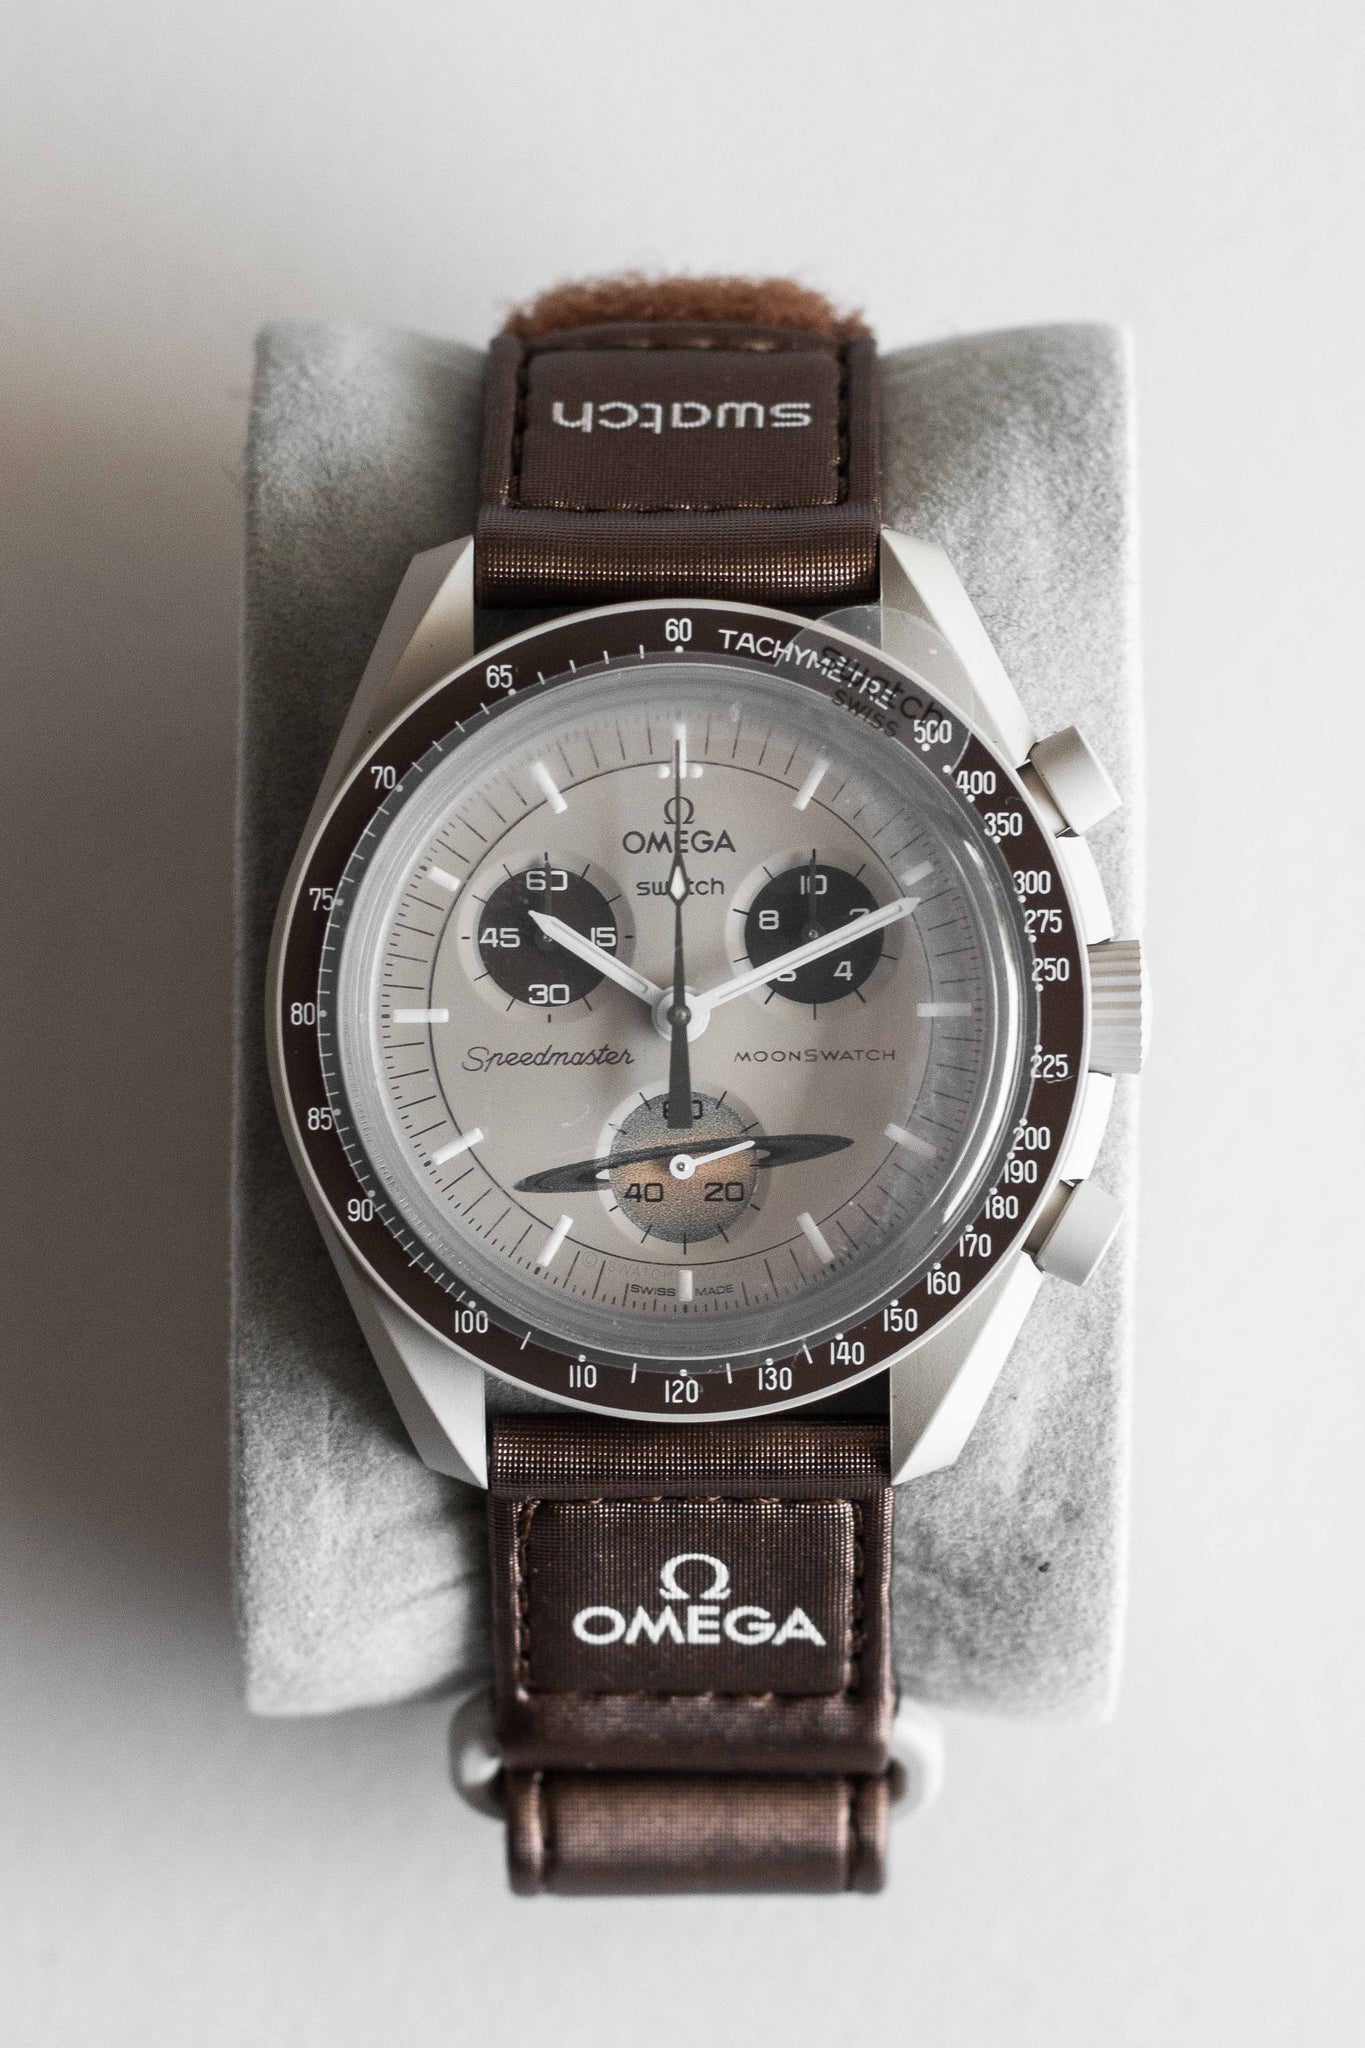 Swatch Omega Mission to Saturn サターン 土星-